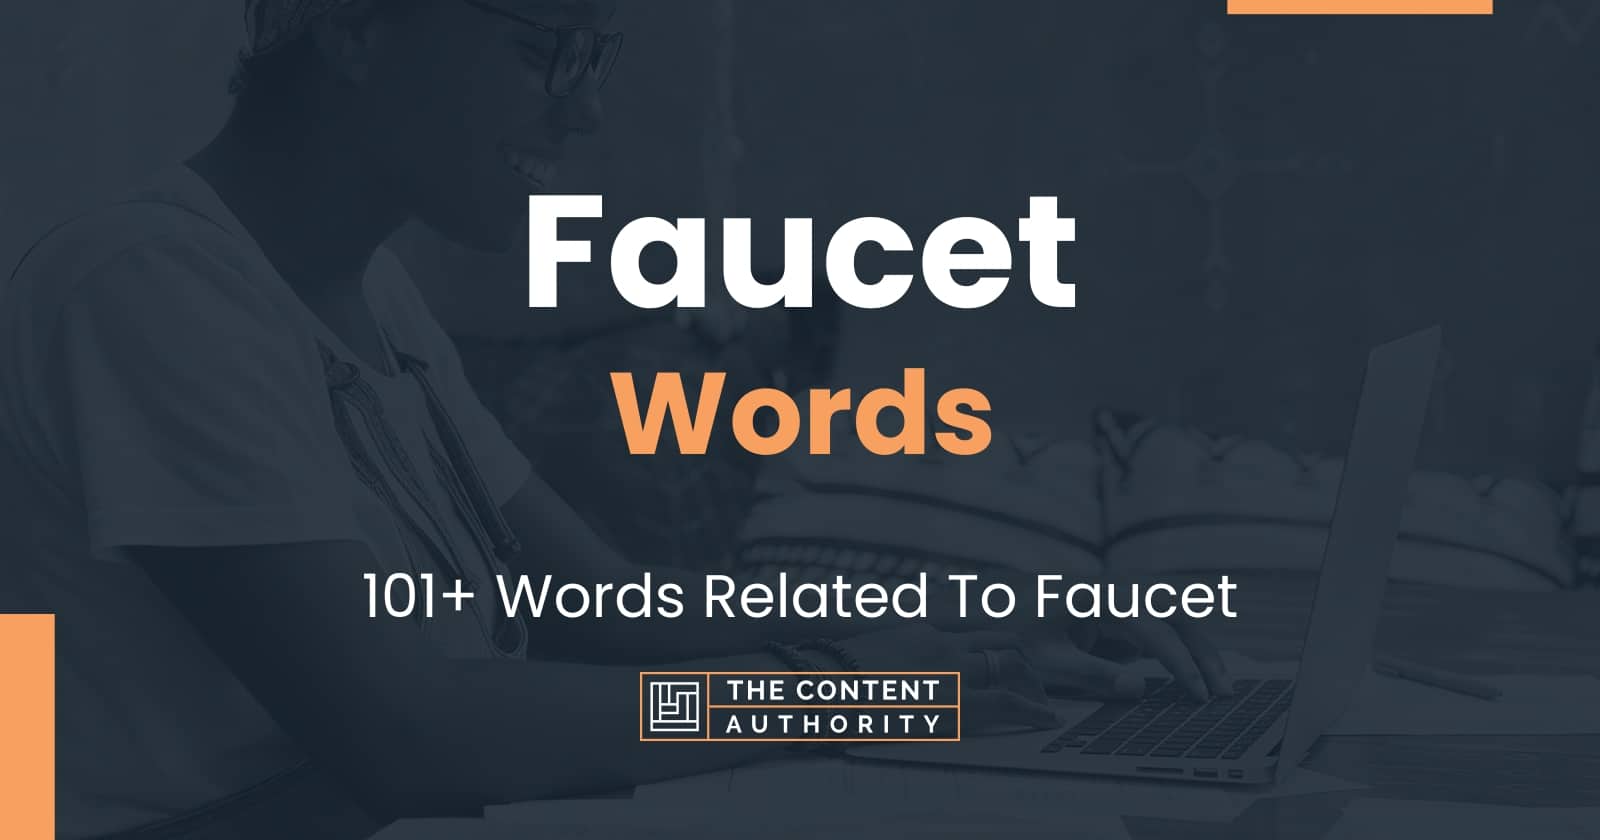 Faucet Words 101  Words Related To Faucet